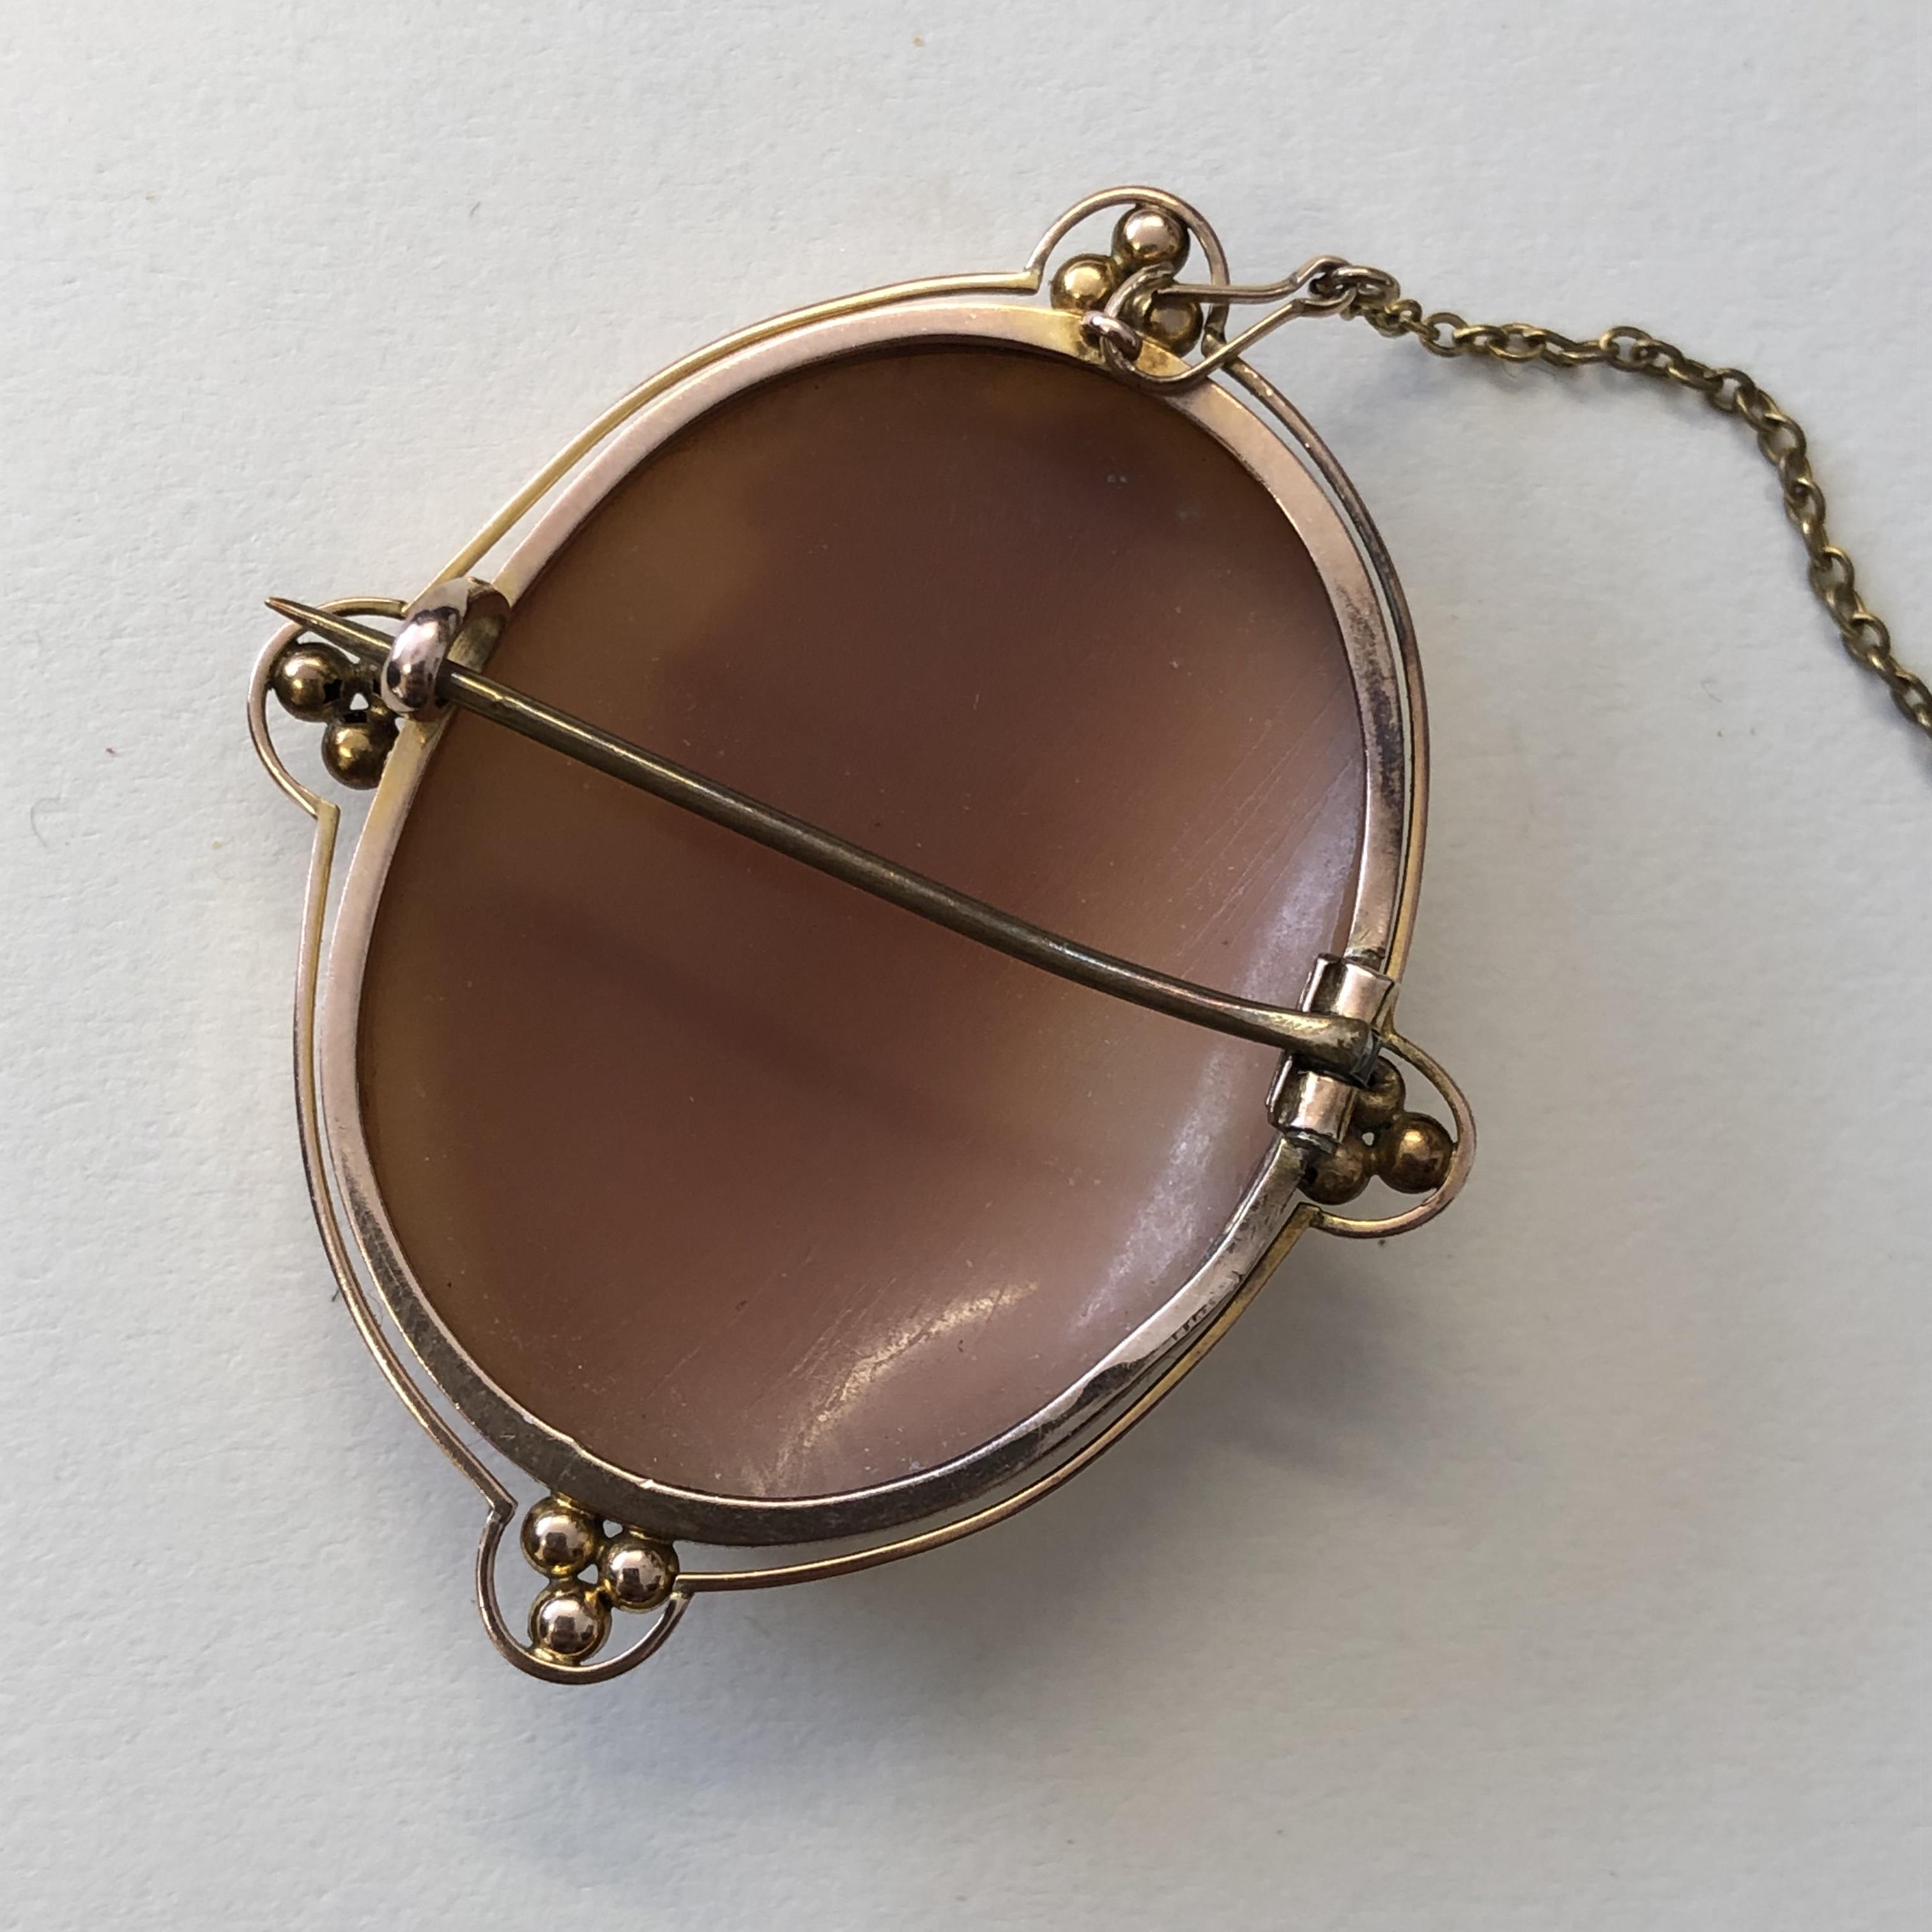 9CT YELLOW GOLD OVAL CAMEO BROOCH WITH SAFETY CHAIN - Image 3 of 3